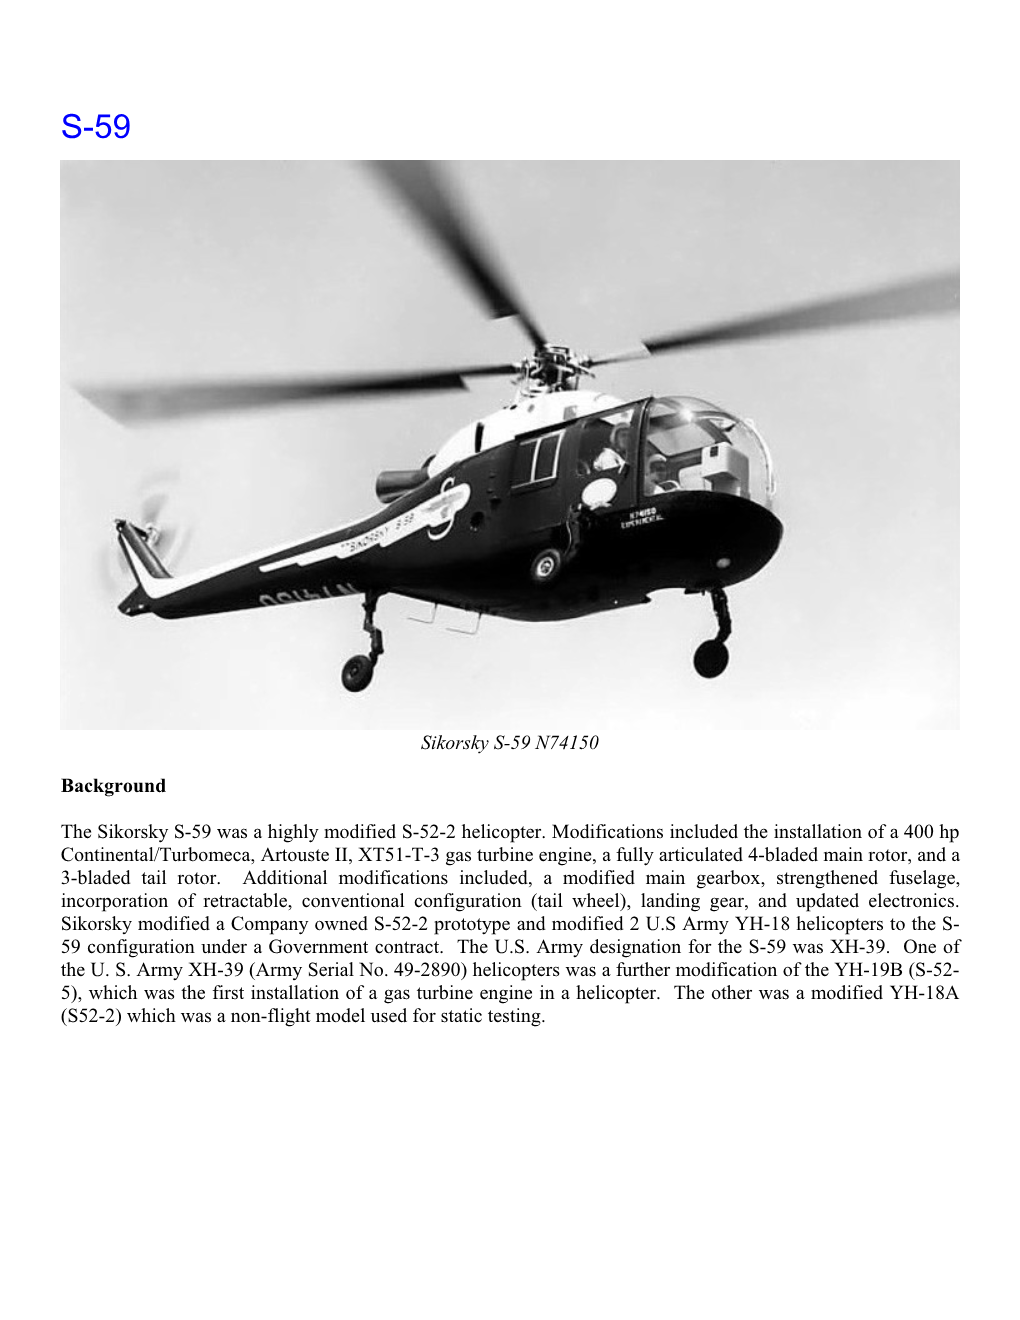 Sikorsky Product History